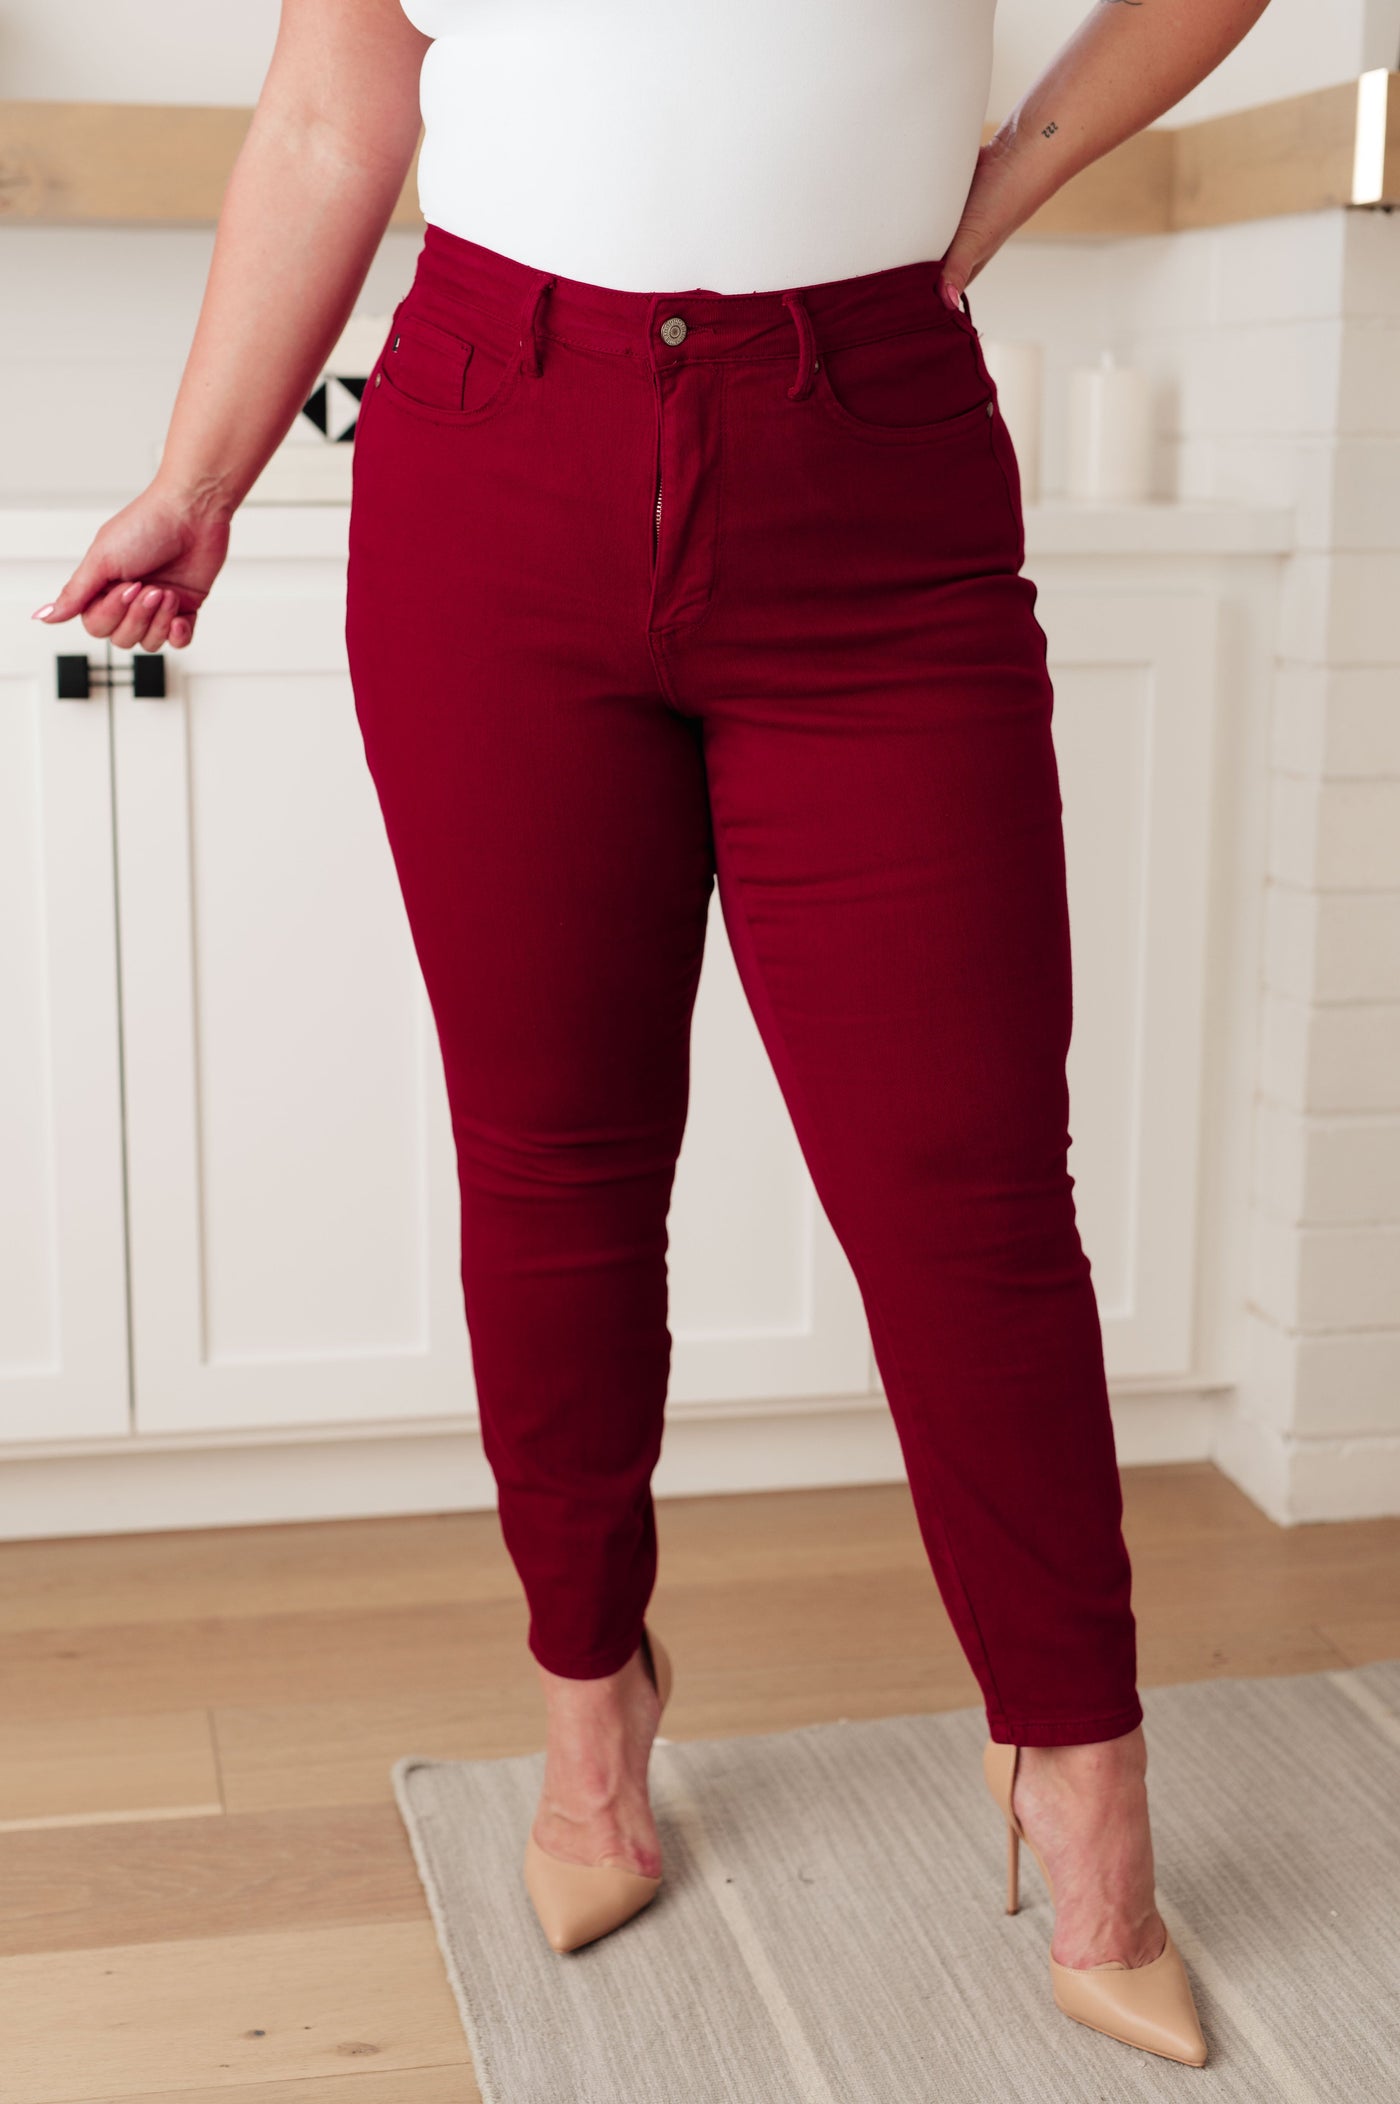 Discover Wanda High Rise Control Top Skinny Jeans from Judy Blue for a flattering and confident fit.